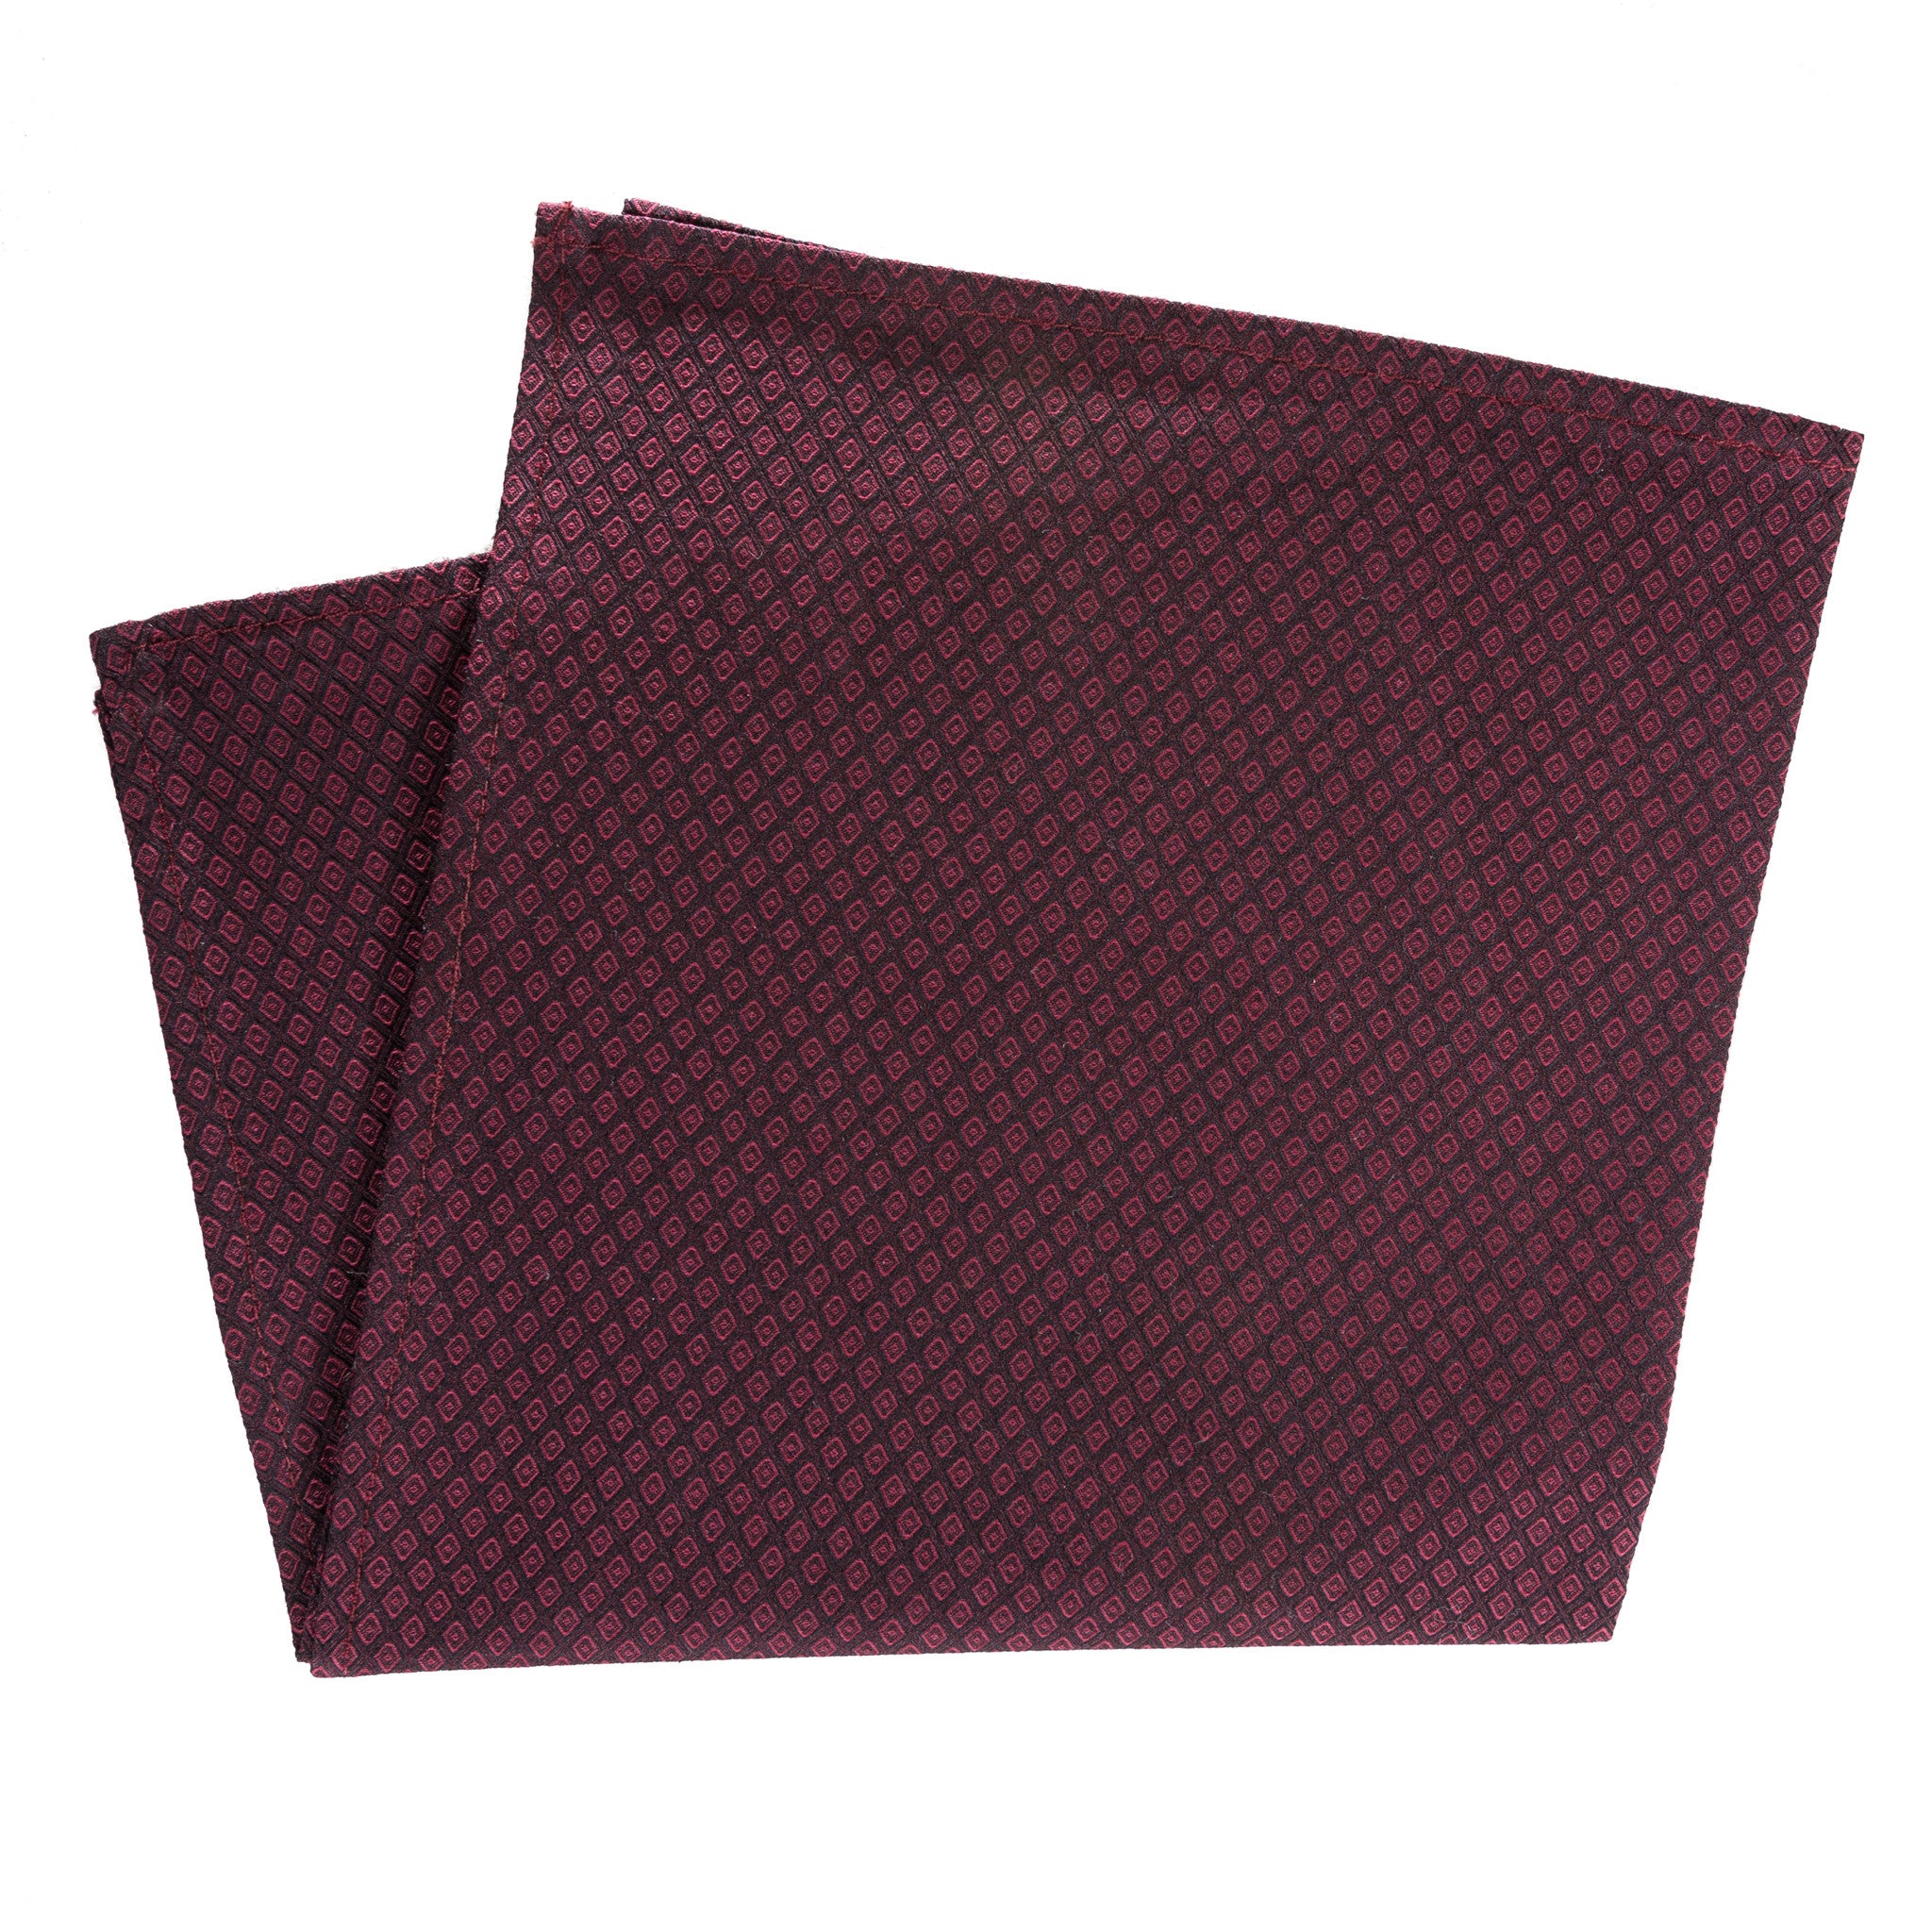 Dot-in-Diamond Grid Pocket Square (additional colors available)